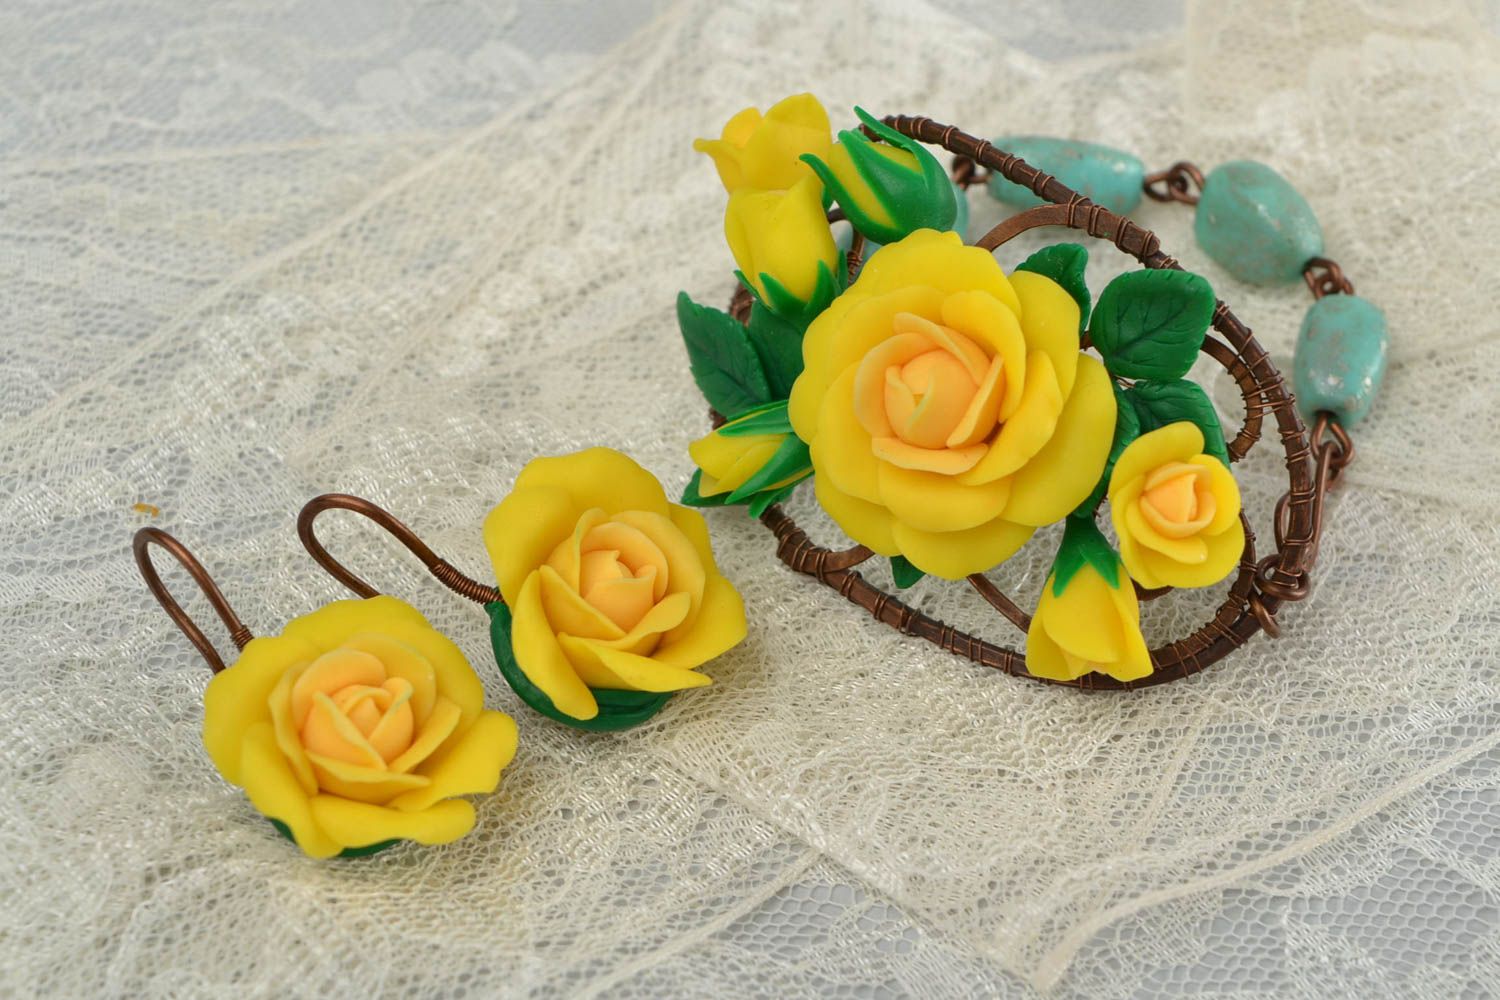 Homemade charm jewelry set yellow roses flower cuff bracelet and earrings for women and girls photo 1